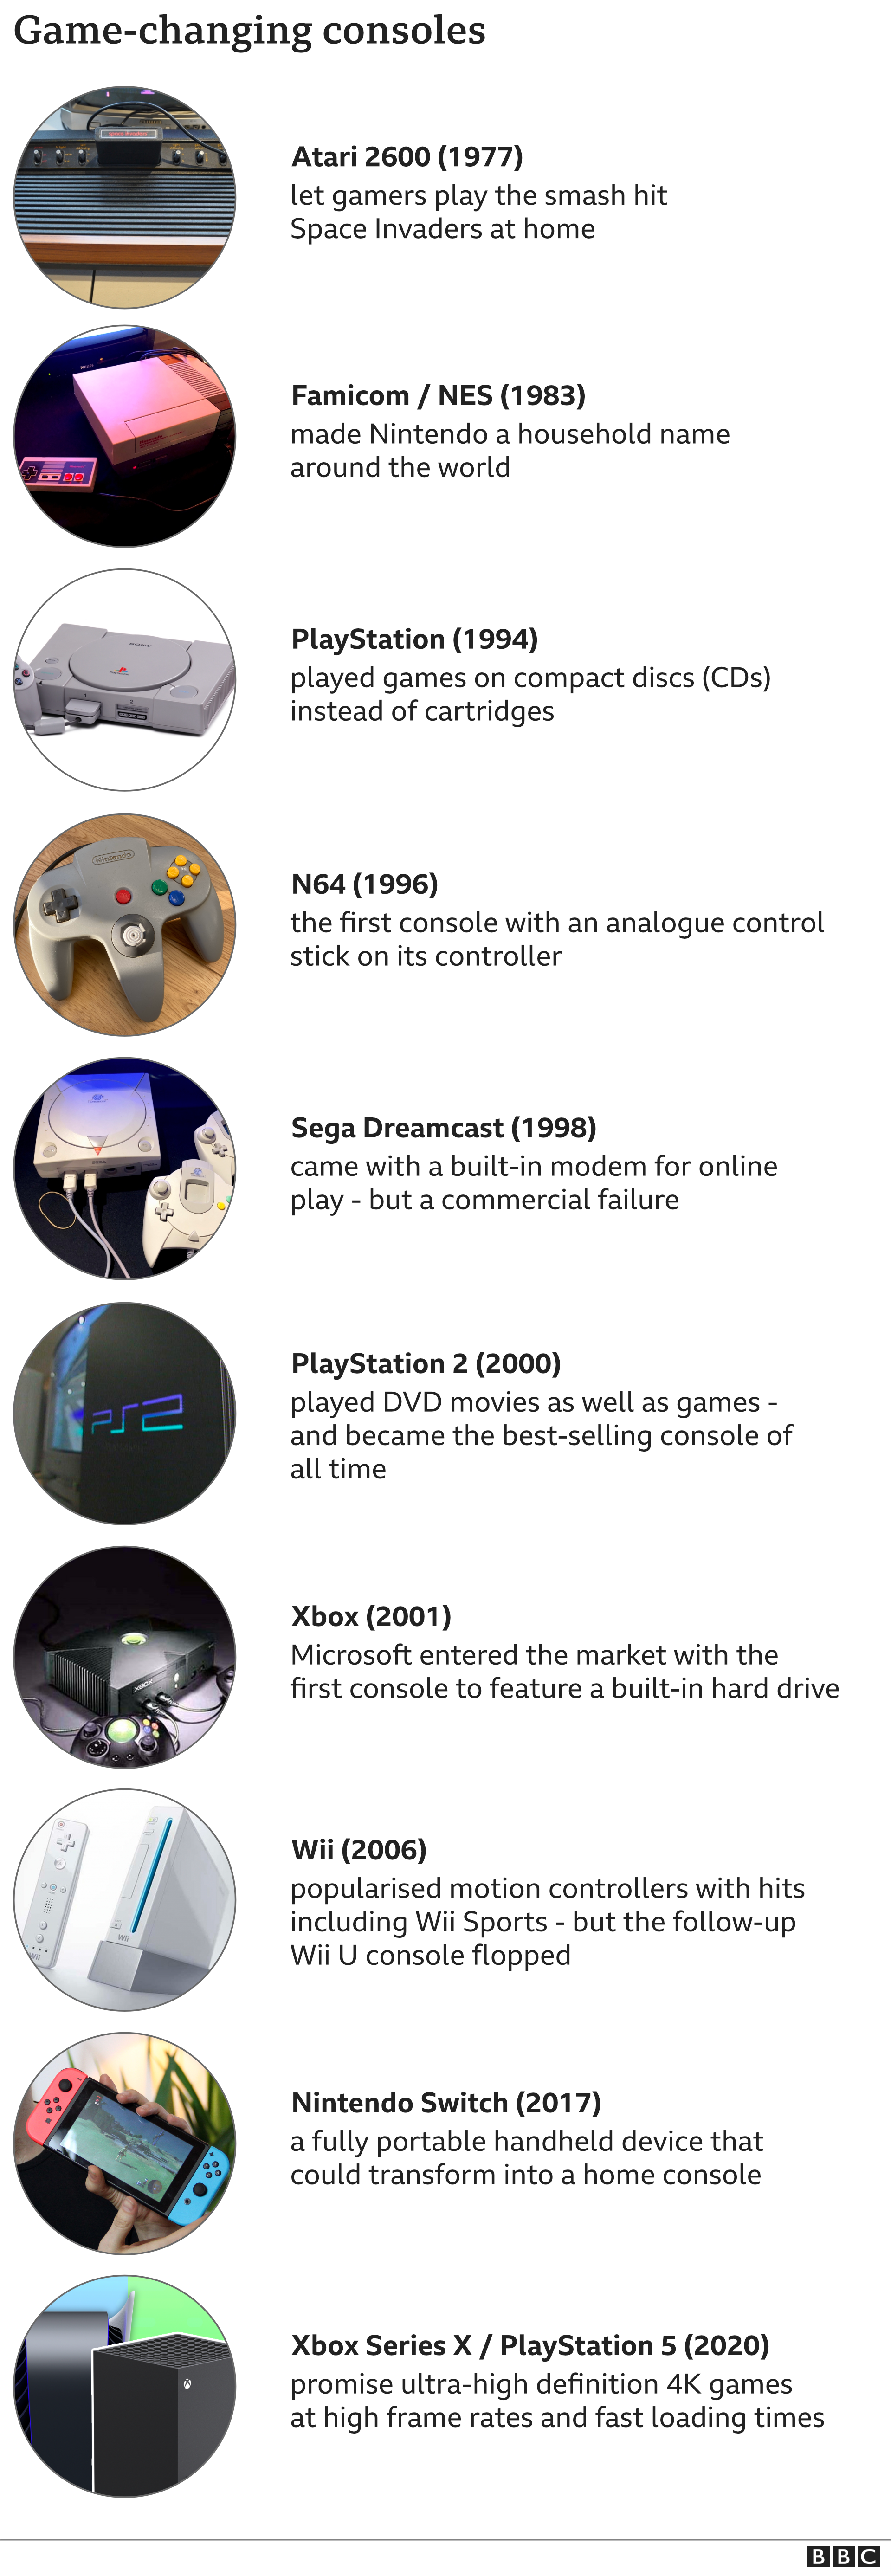 A list of game-changing consoles - showing the Atari 2600 from 1977 up to the PS5 and Xbox Series X